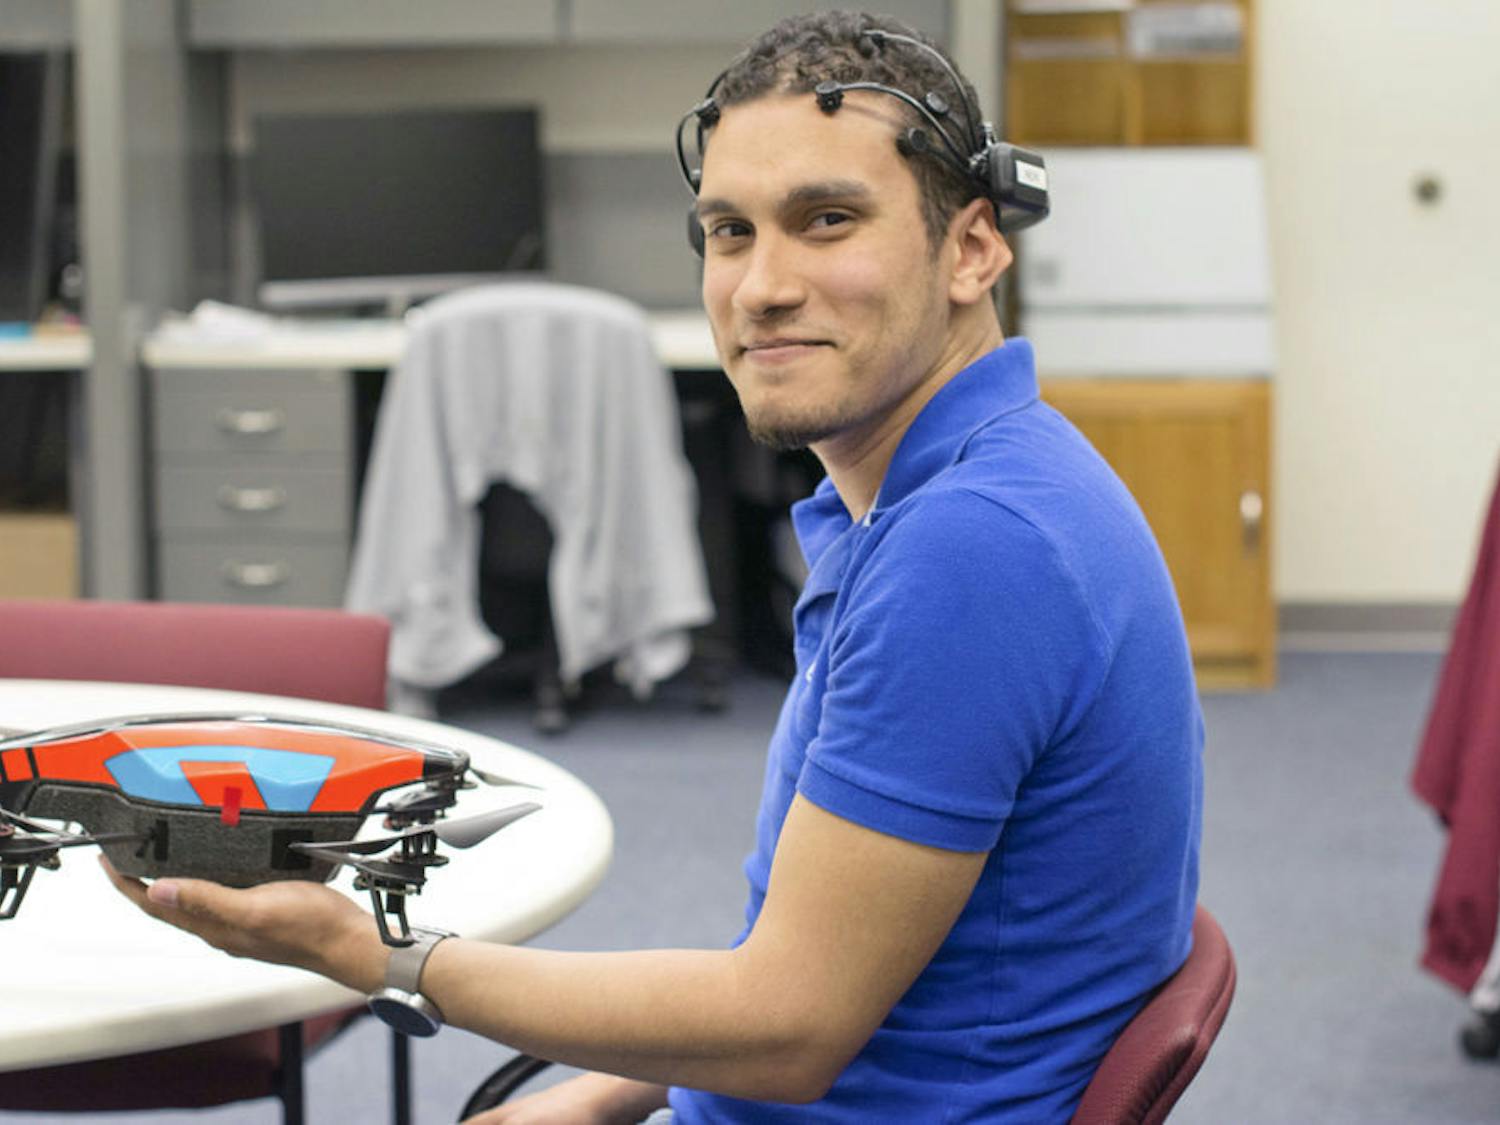 Marvin Andujar, a 25-year-old UF human-centered computing doctoral student, poses for a photo with a mind-controlled drone that he and his partner, Chris Crawford, programmed.